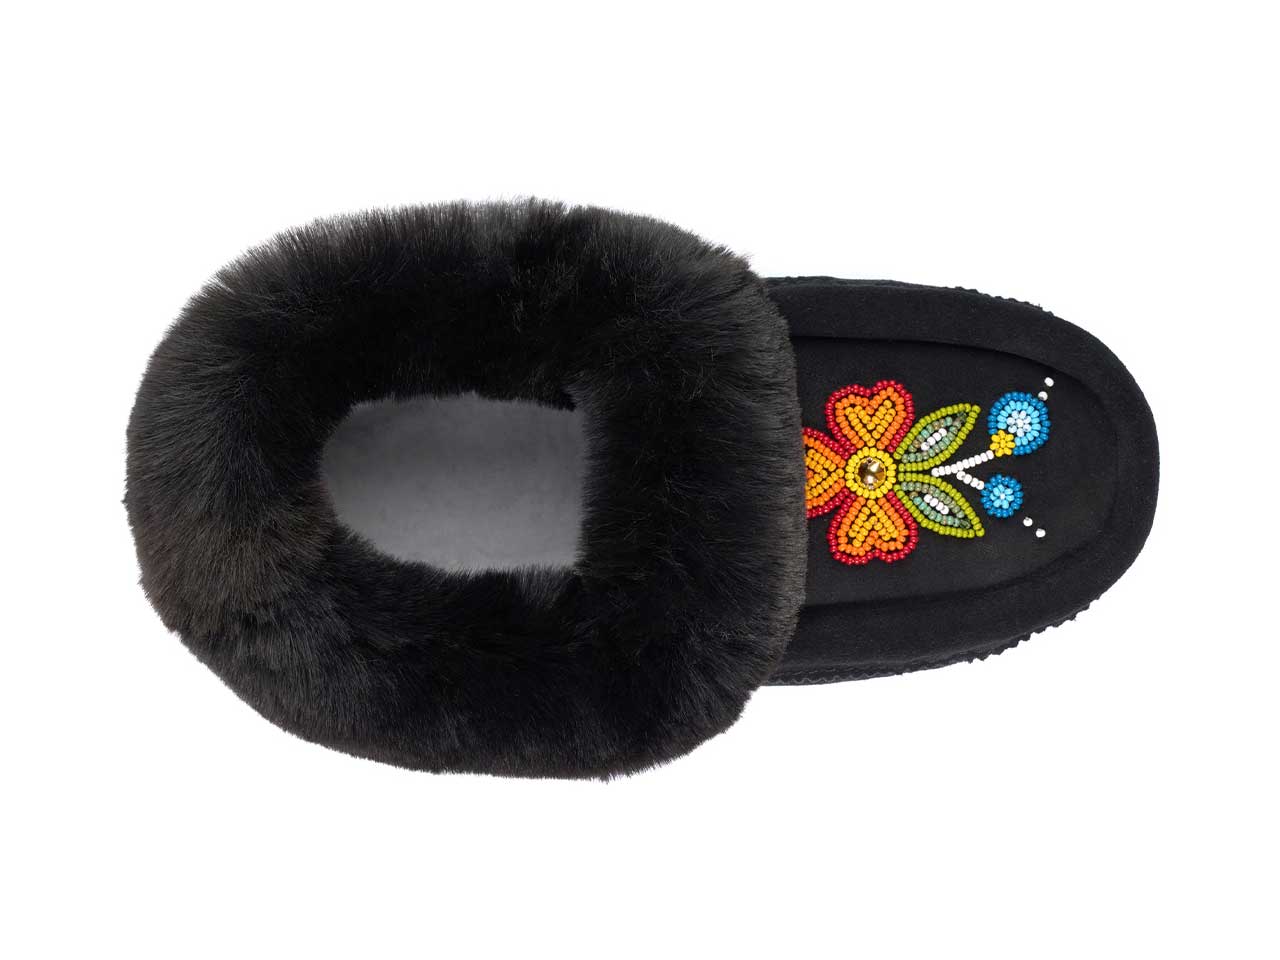 A black slipper with black fur and a beaded floral design seen from above.